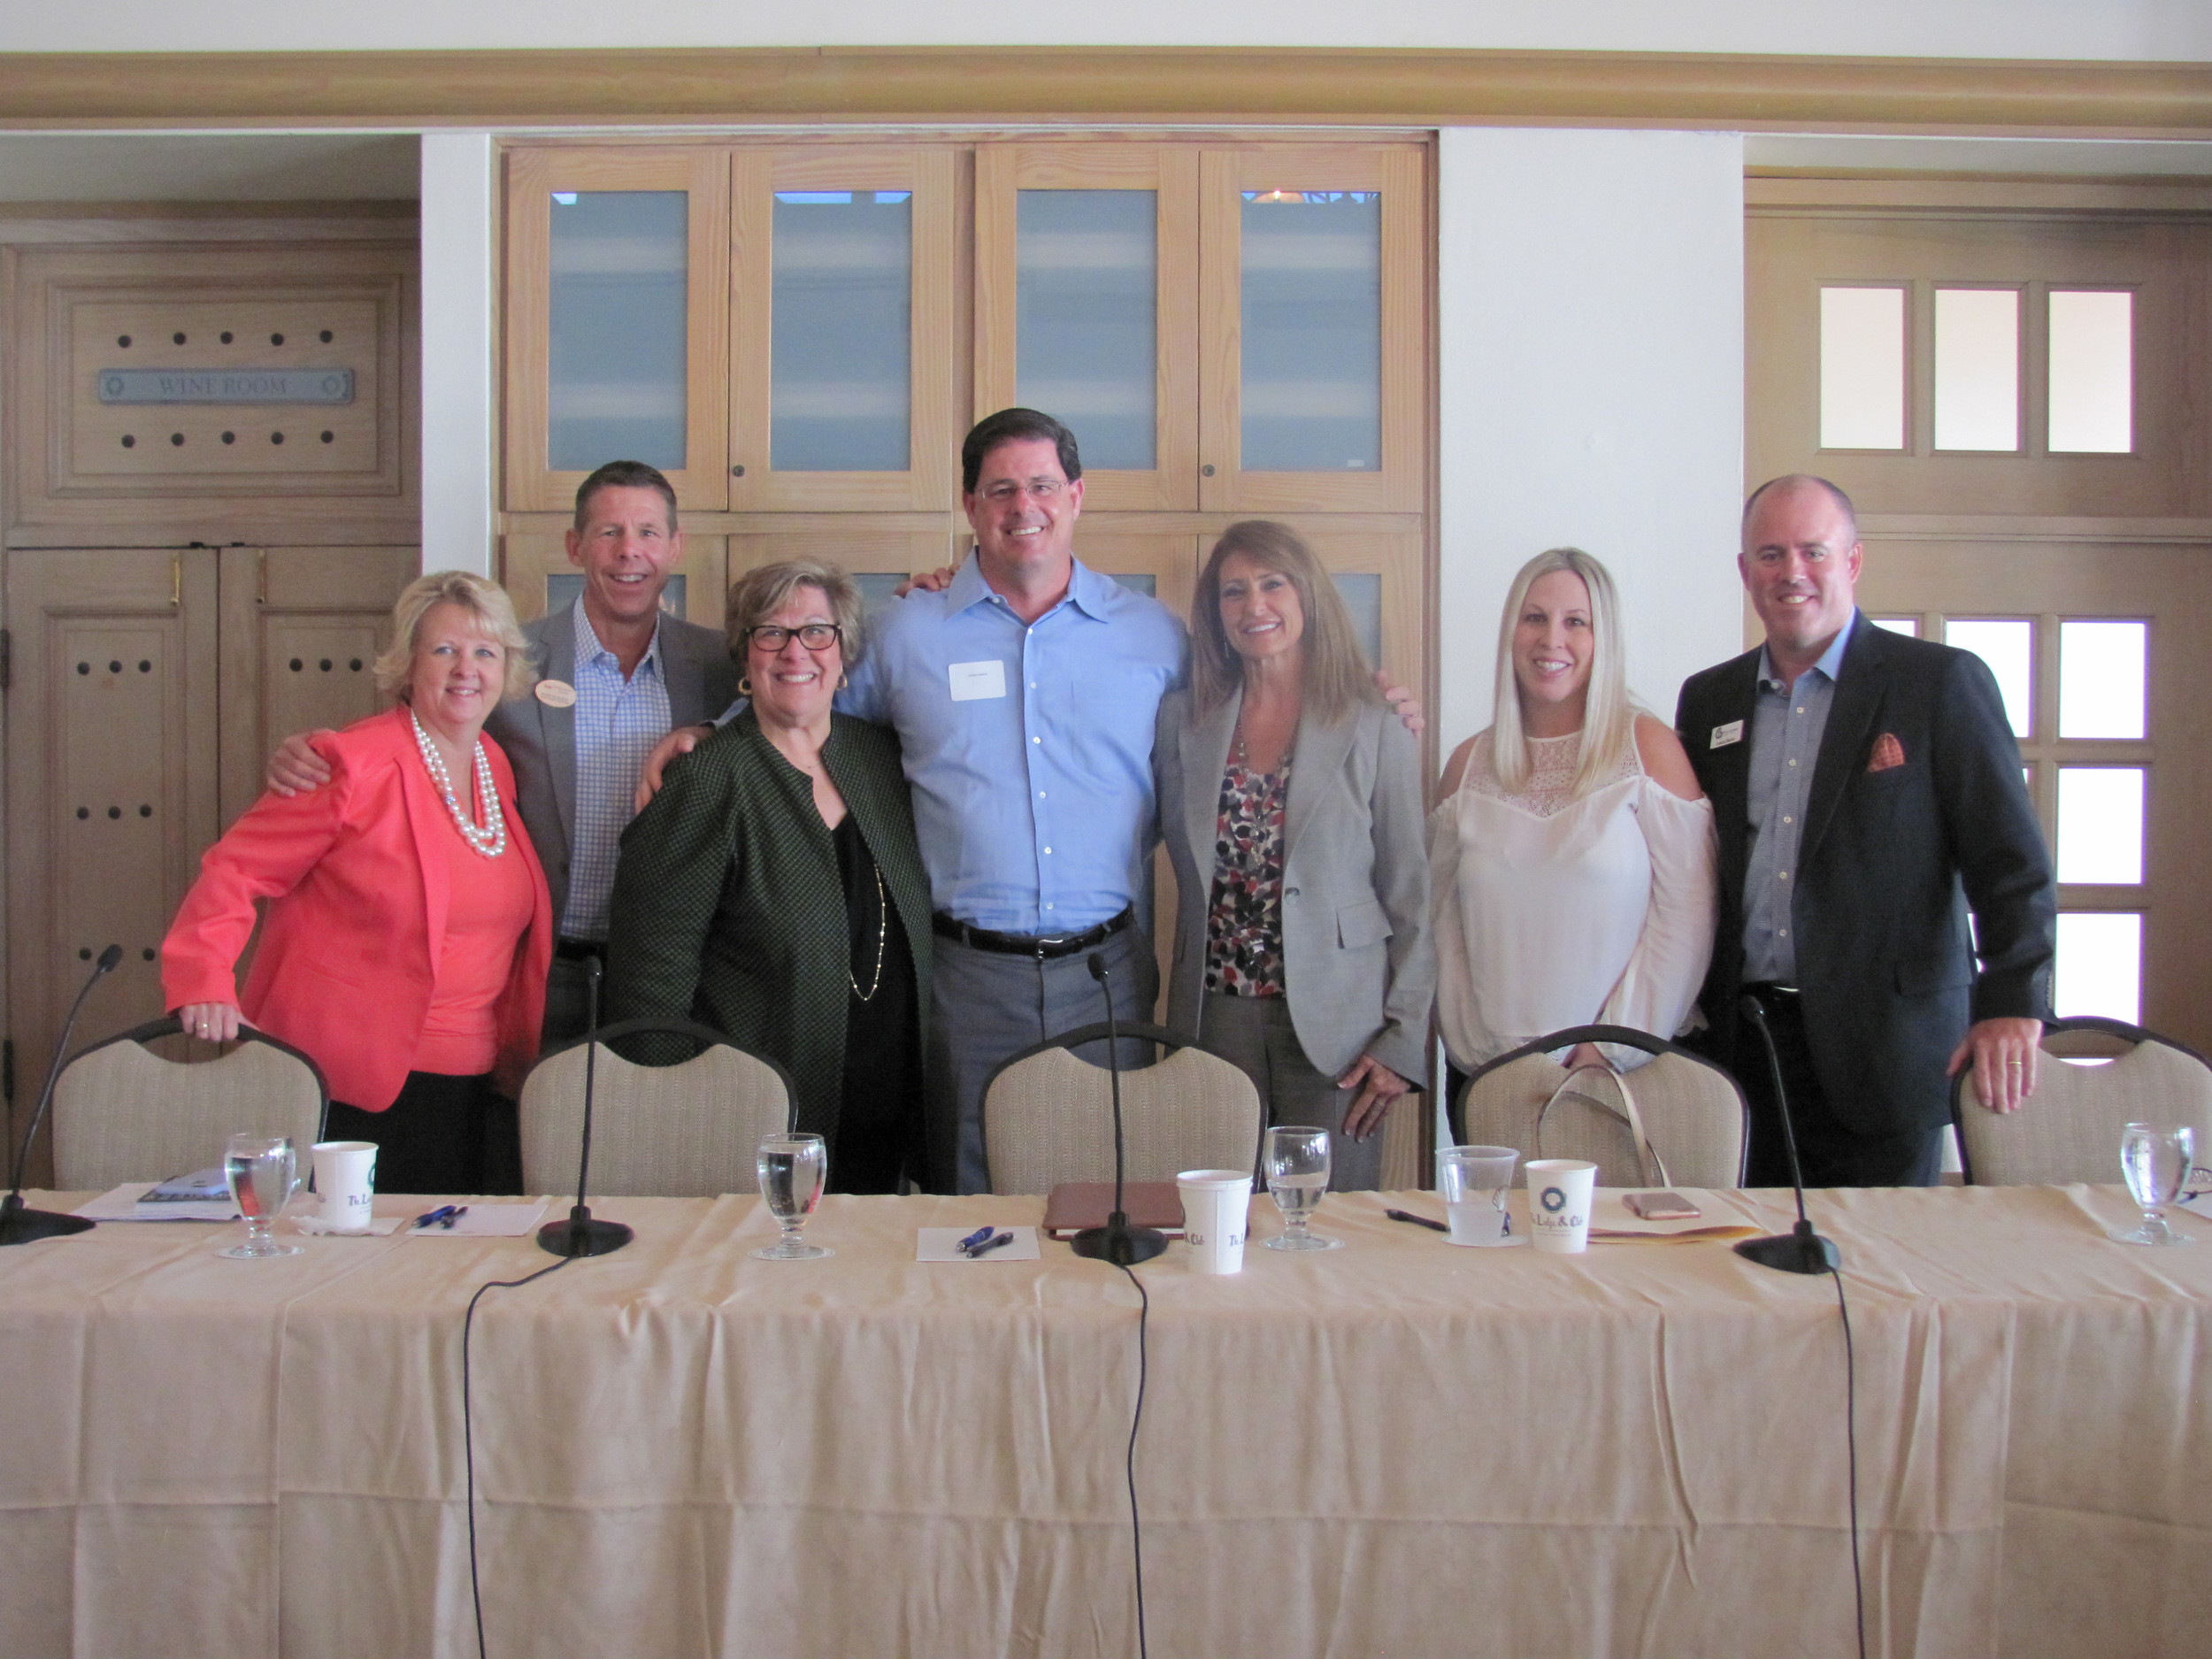 Panelists and local real estate brokers Eileen Ferrell McVeigh, Mark Dilworth, Mary Ann Bongiorno, James Valenti, Kim Davis, Krista Fracke and First Guaranty Mortgage Corp.’s Aaron Bacus